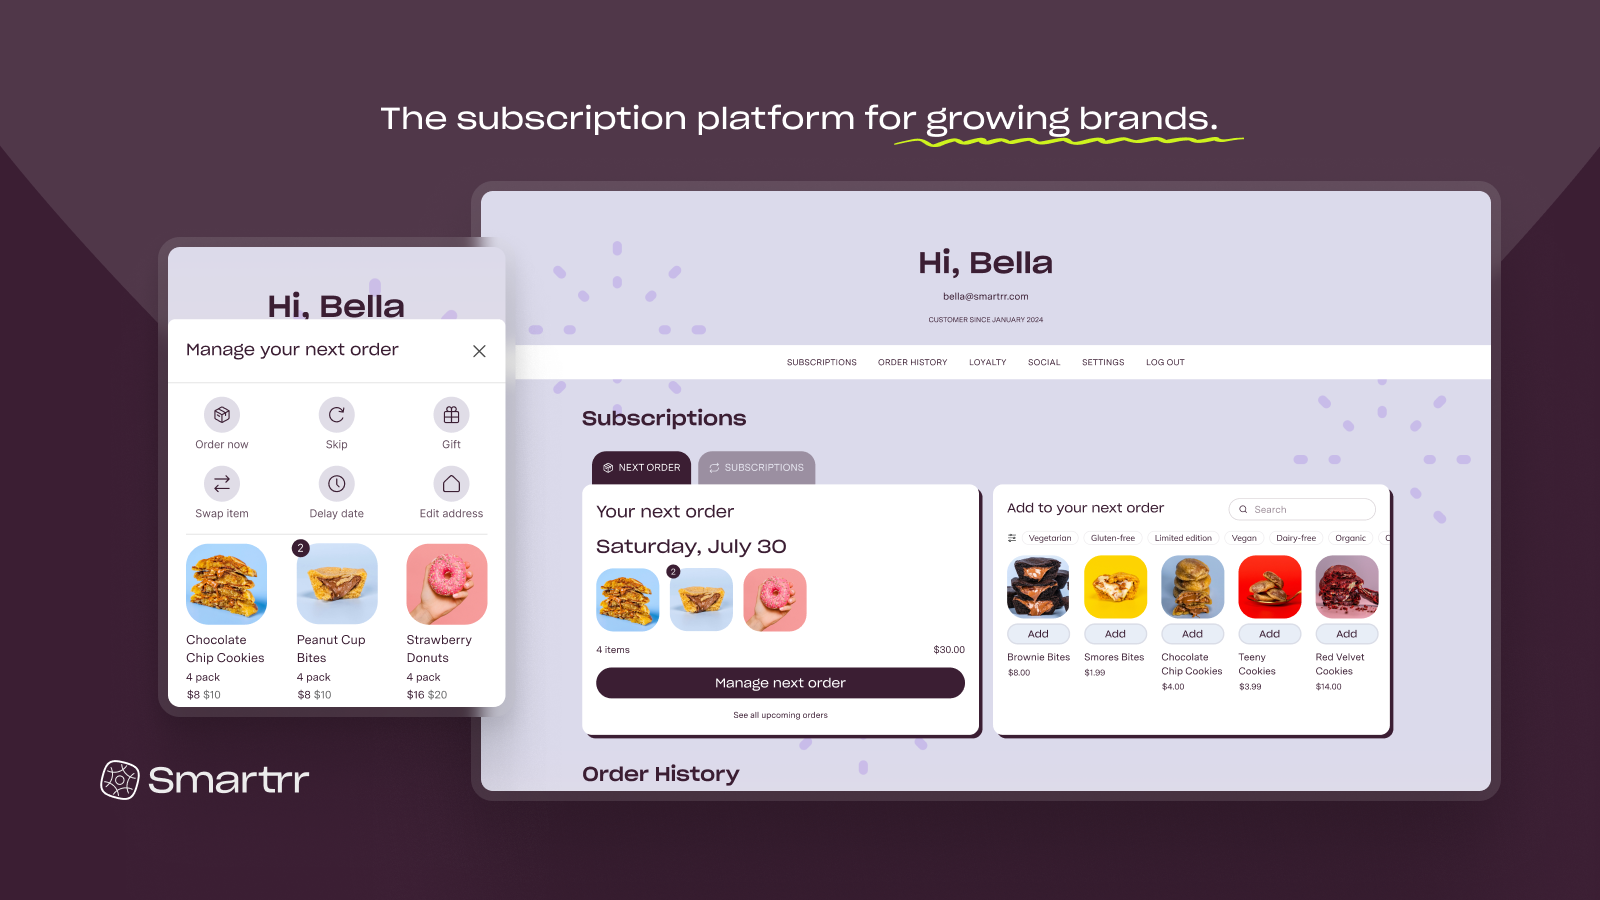 The subscription platform for growing brands.